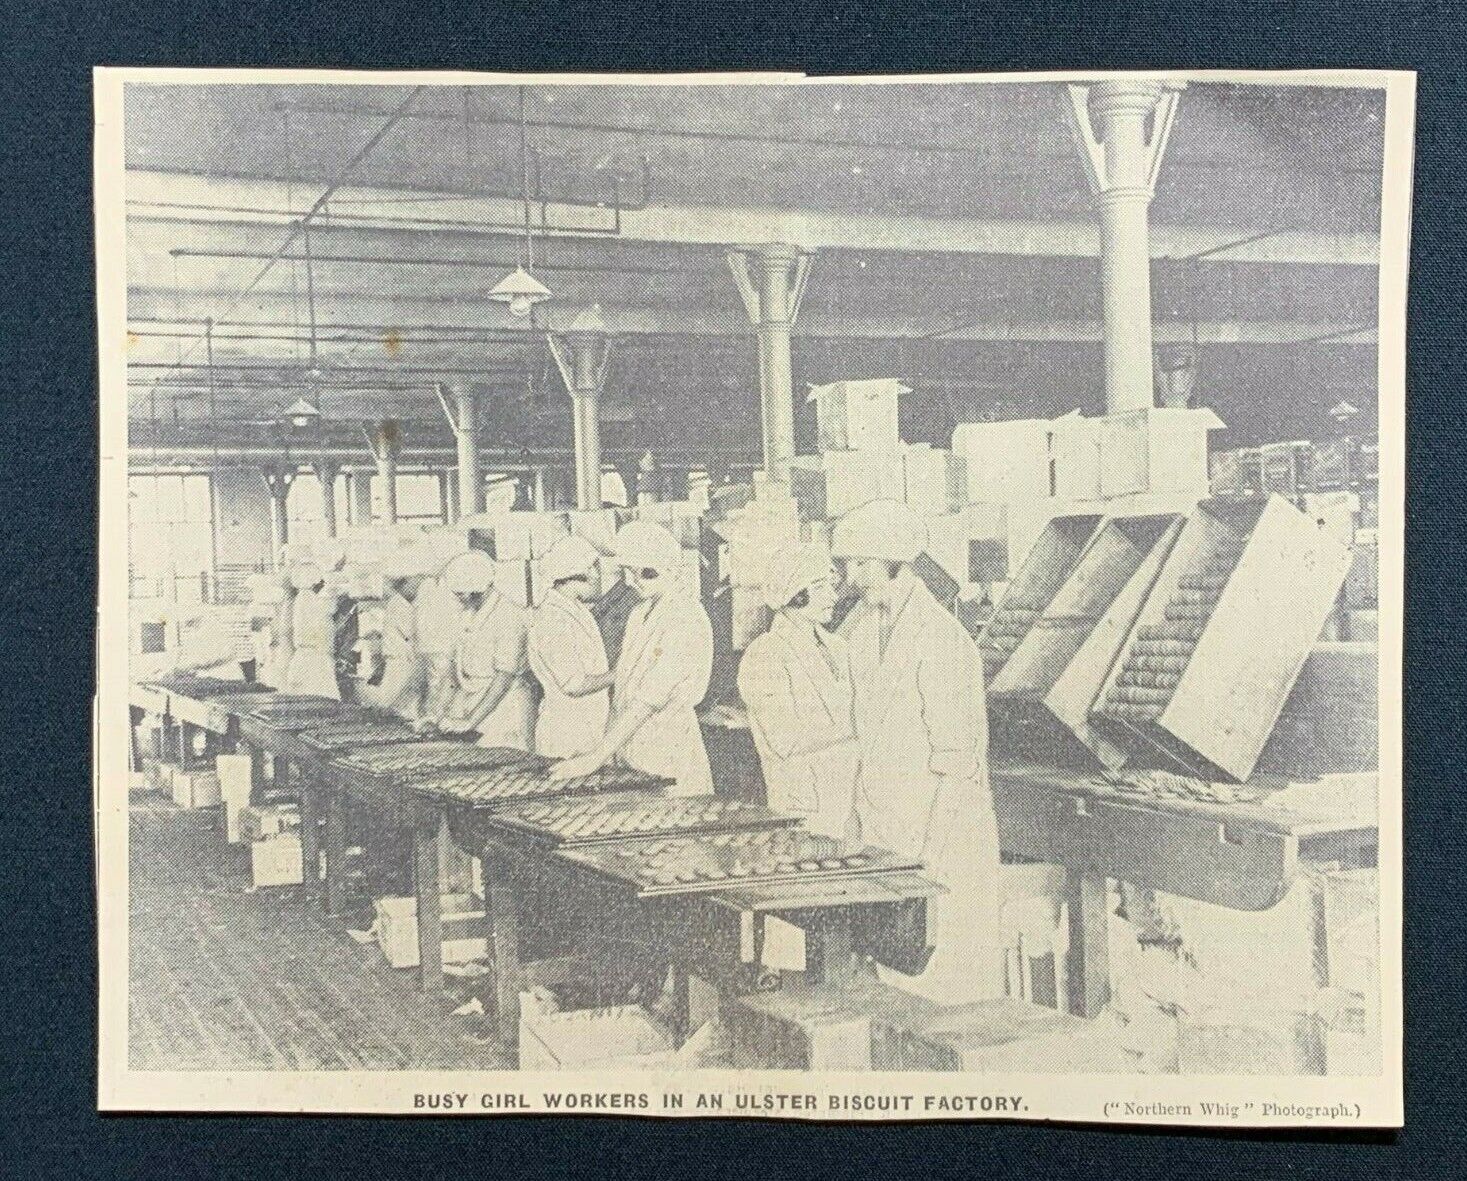 1938 Newspaper Clipping BUSY GIRL WORKERS IN AN ULSTER BISCUIT FACTORY